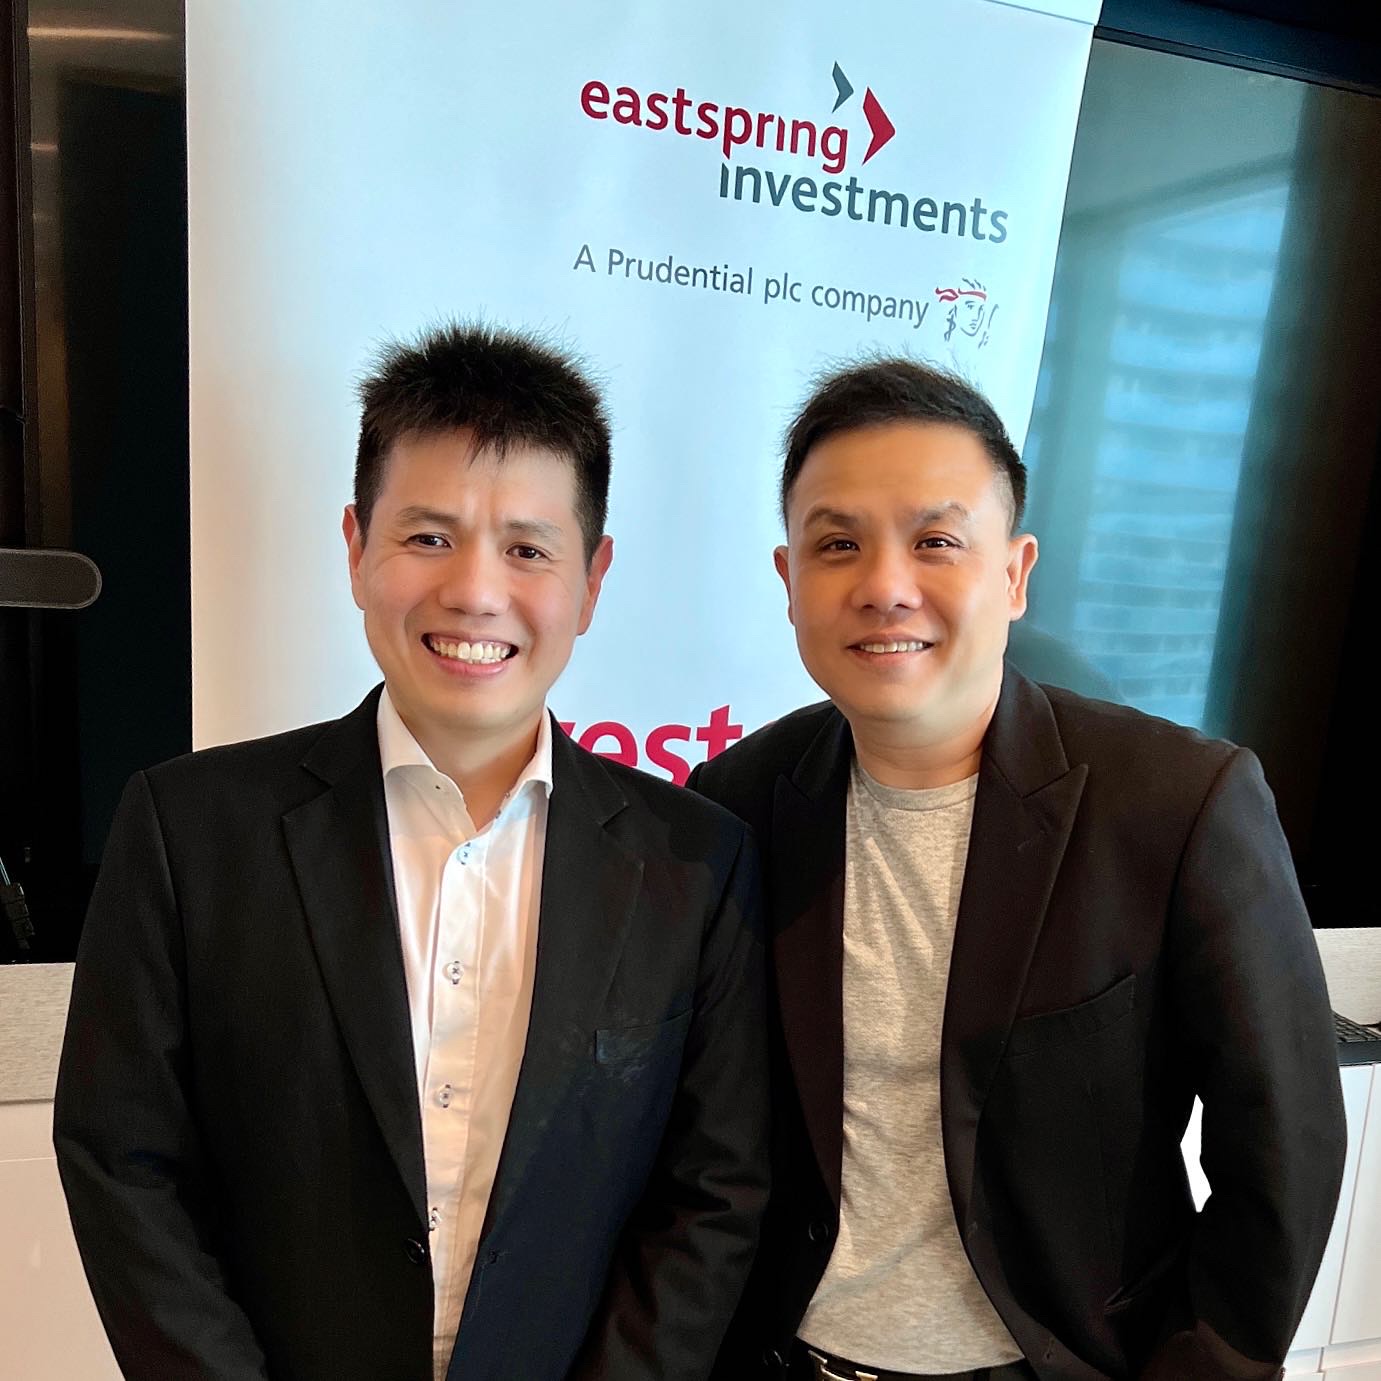 Meeting Portfolio Manager Goh Rong Ren from Eastspring Investment Singapore